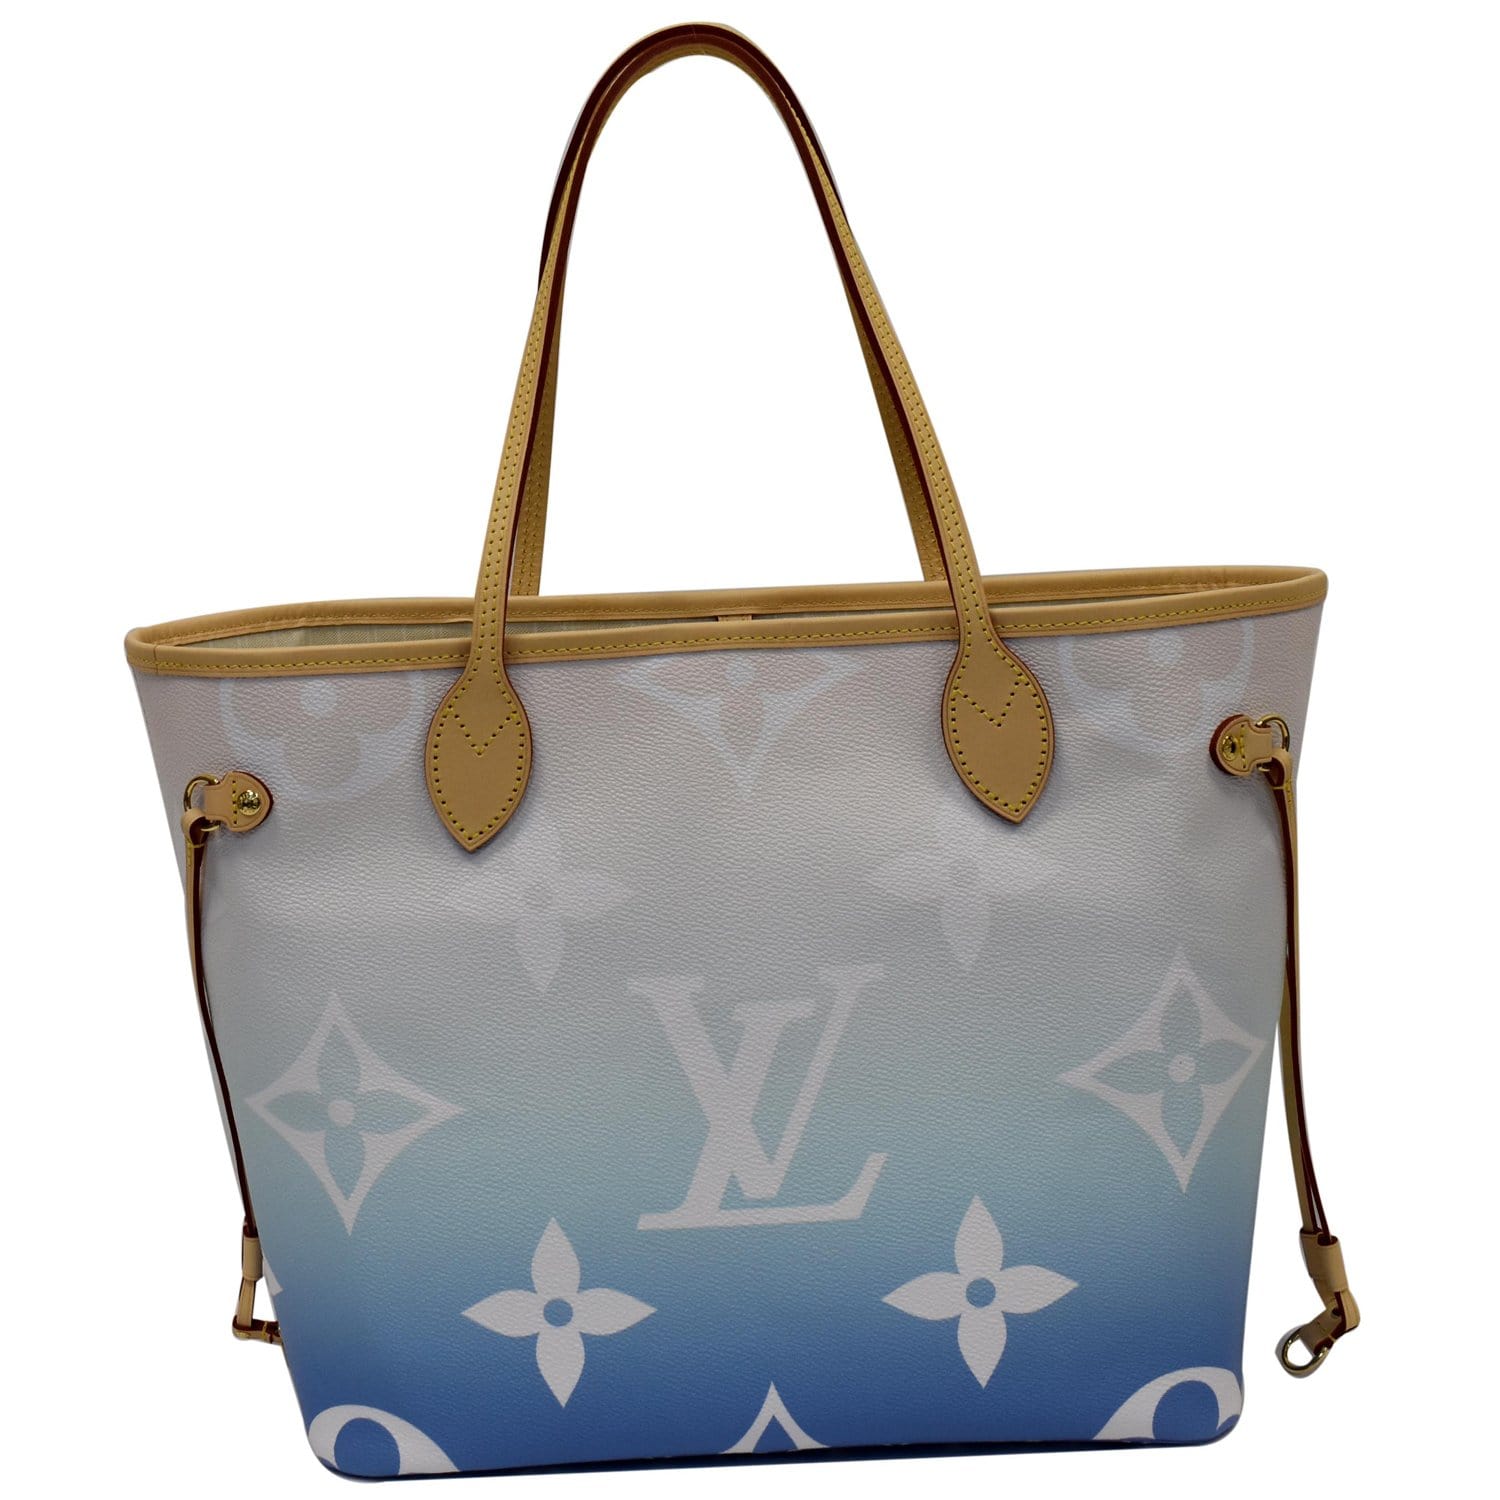 lv by the pool blue